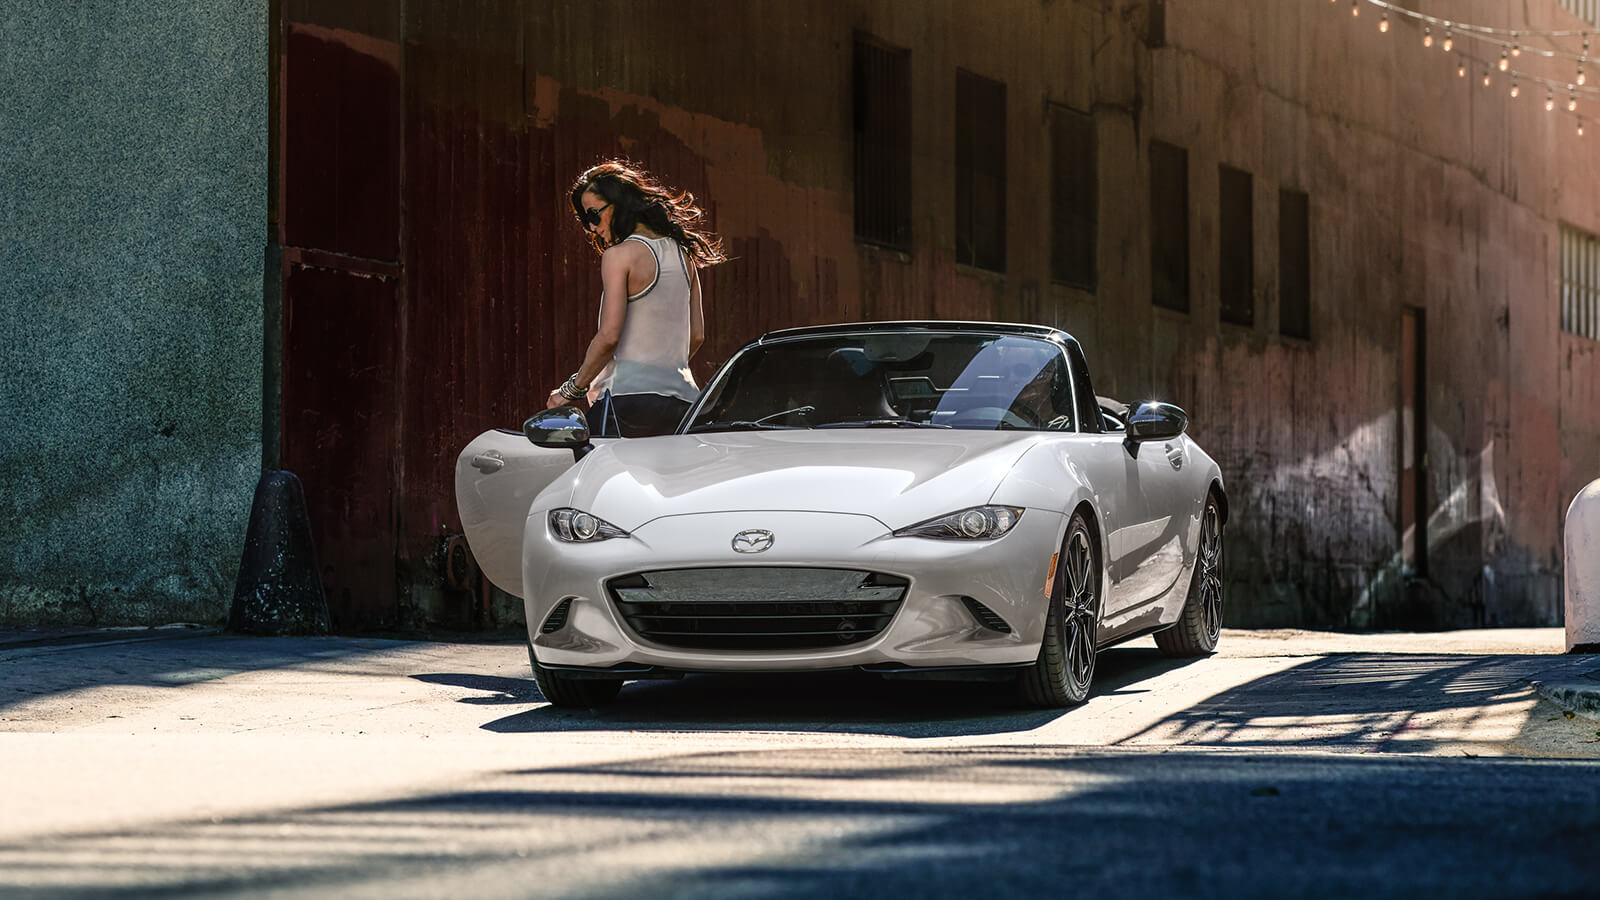 Woman exits the passenger's side of Snowflake Whit Pearl MX-5 parked in front of large, weathered wooden door. 